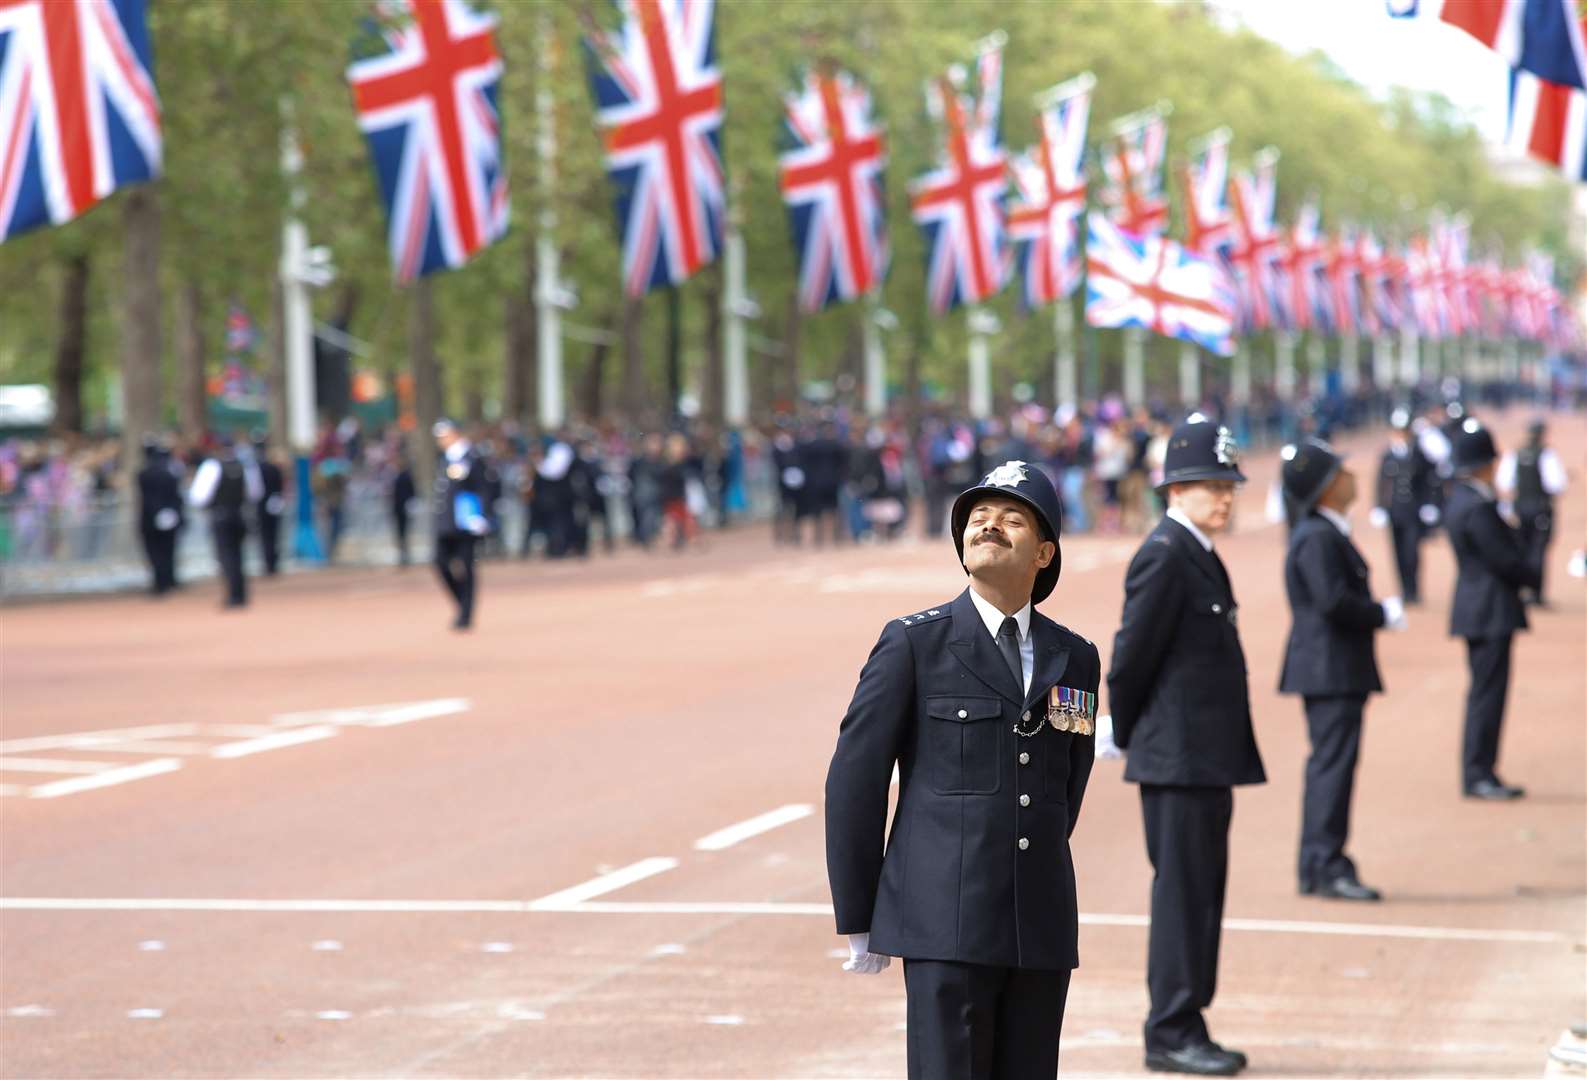 A police officer enjoys the atmosphere on the Mall in London during the Diamond Jubilee celebrations (John Cantlie/PA)